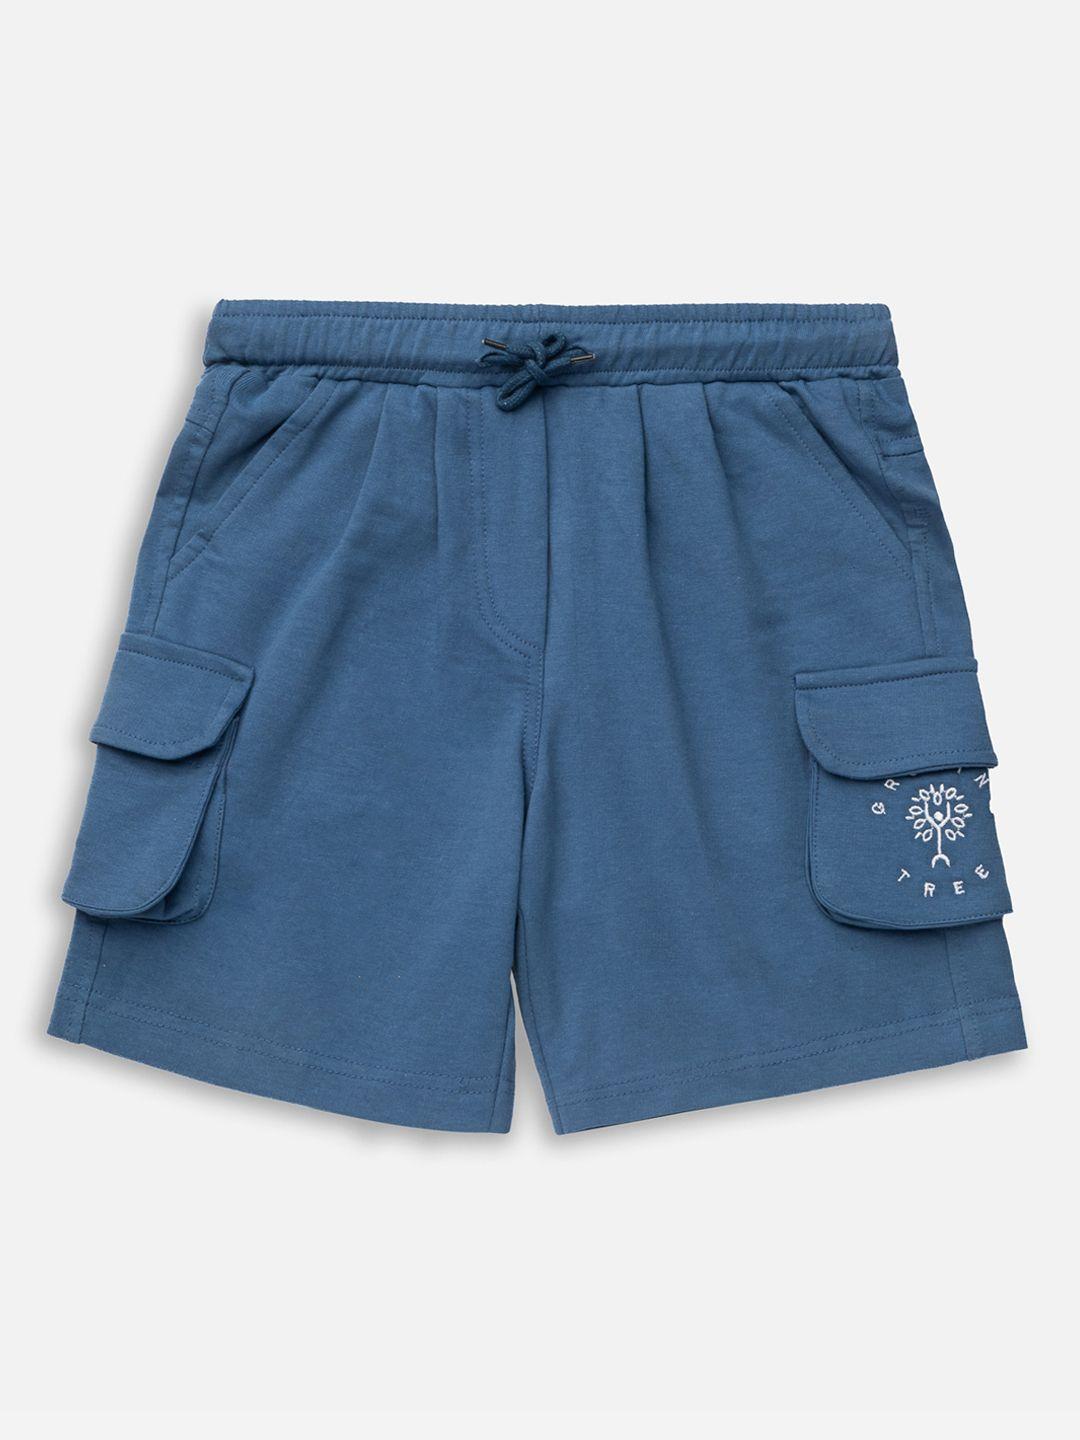 growing tree unisex kids blue outdoor antimicrobial technology shorts